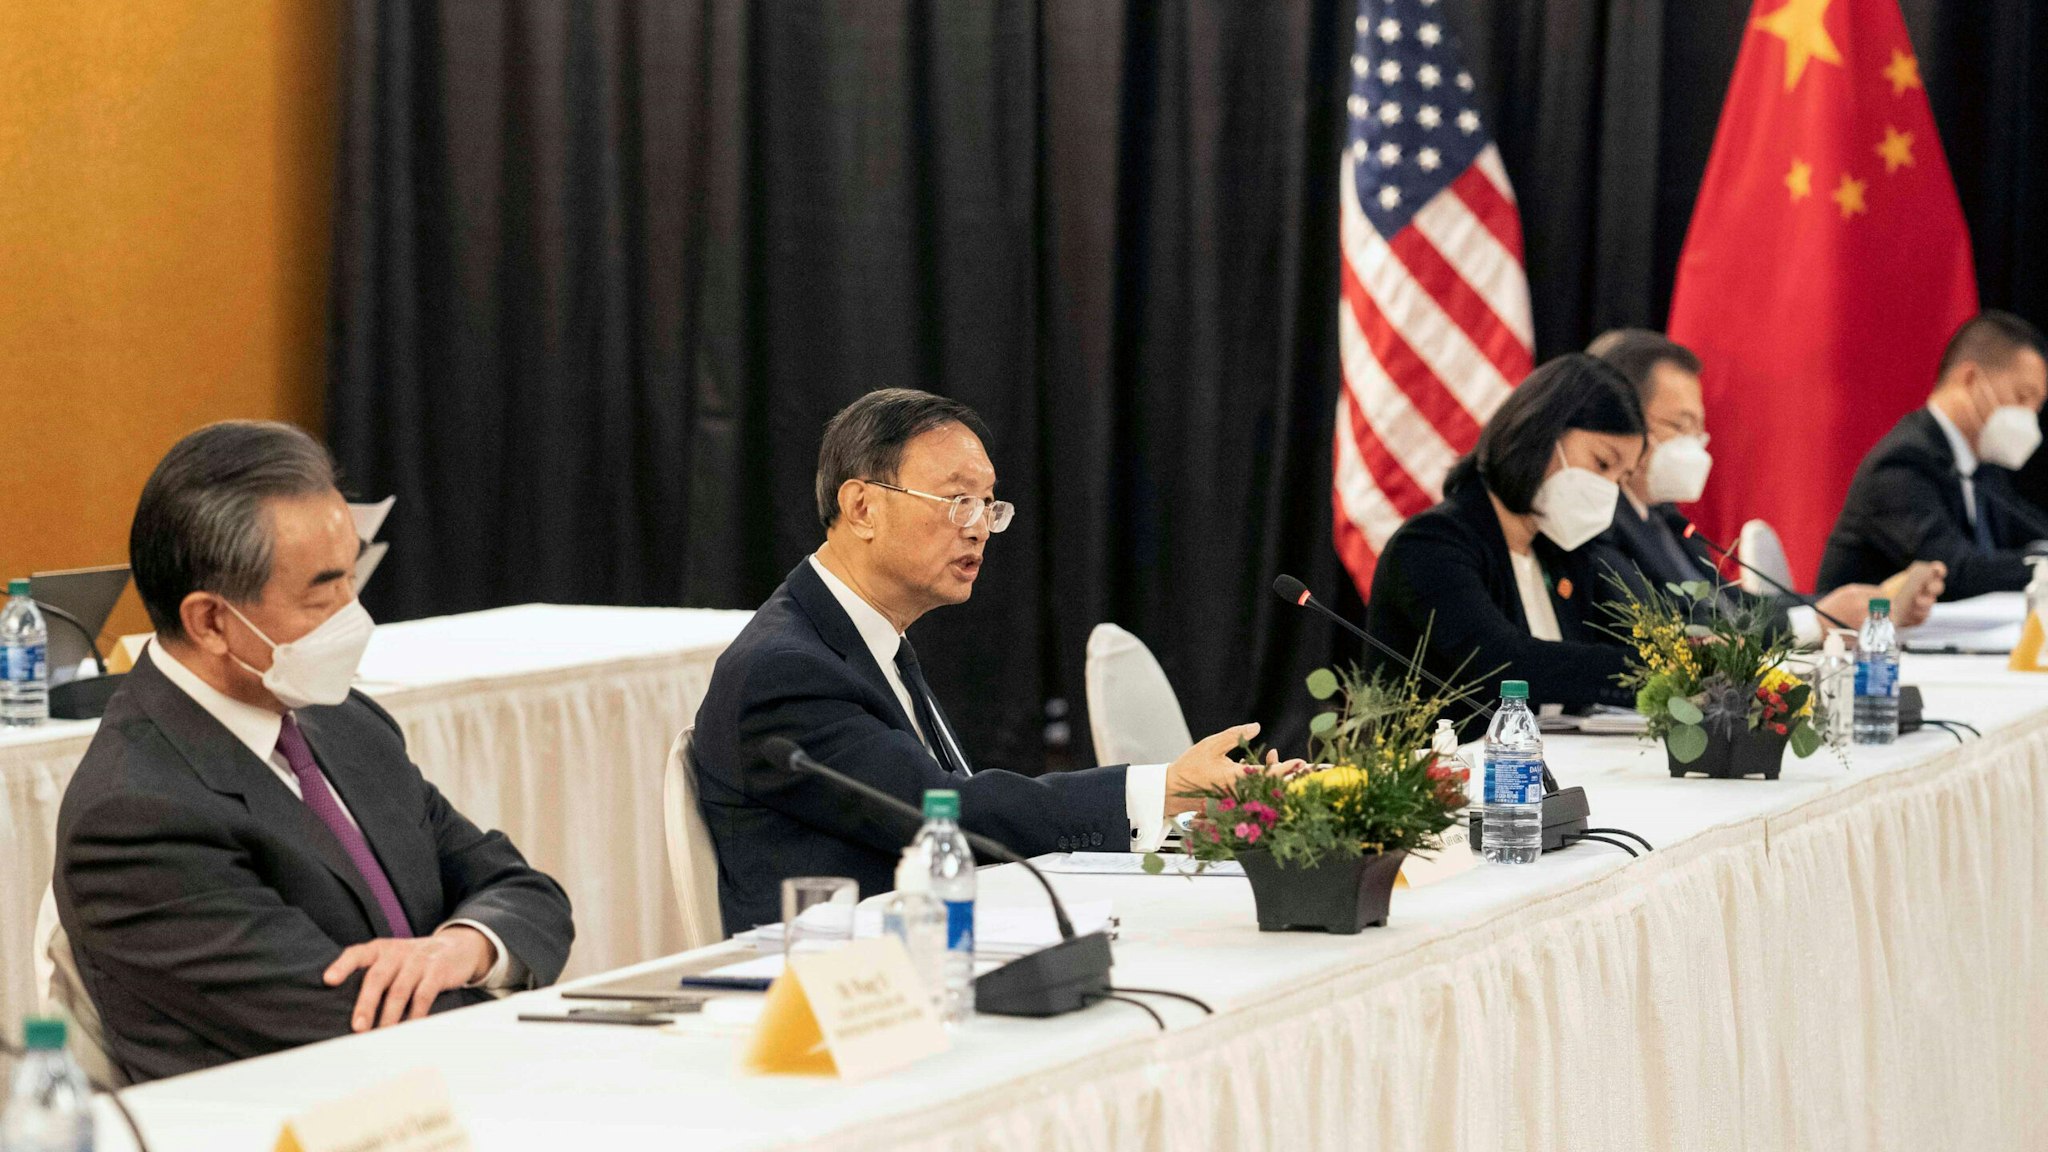 ANCHORAGE, the United States, March 18, 2021 -- Yang Jiechi, a member of the Political Bureau of the Communist Party of China CPC Central Committee and director of the Office of the Foreign Affairs Commission of the CPC Central Committee, puts forward China's stands on relevant issues at the start of the high-level strategic dialogue with the United States in the Alaskan city of Anchorage on March 18, 2021. Yang Jiechi, Chinese State Councilor and Foreign Minister Wang Yi, U.S. Secretary of State Antony Blinken and U.S. National Security Advisor Jake Sullivan attended the dialogue.